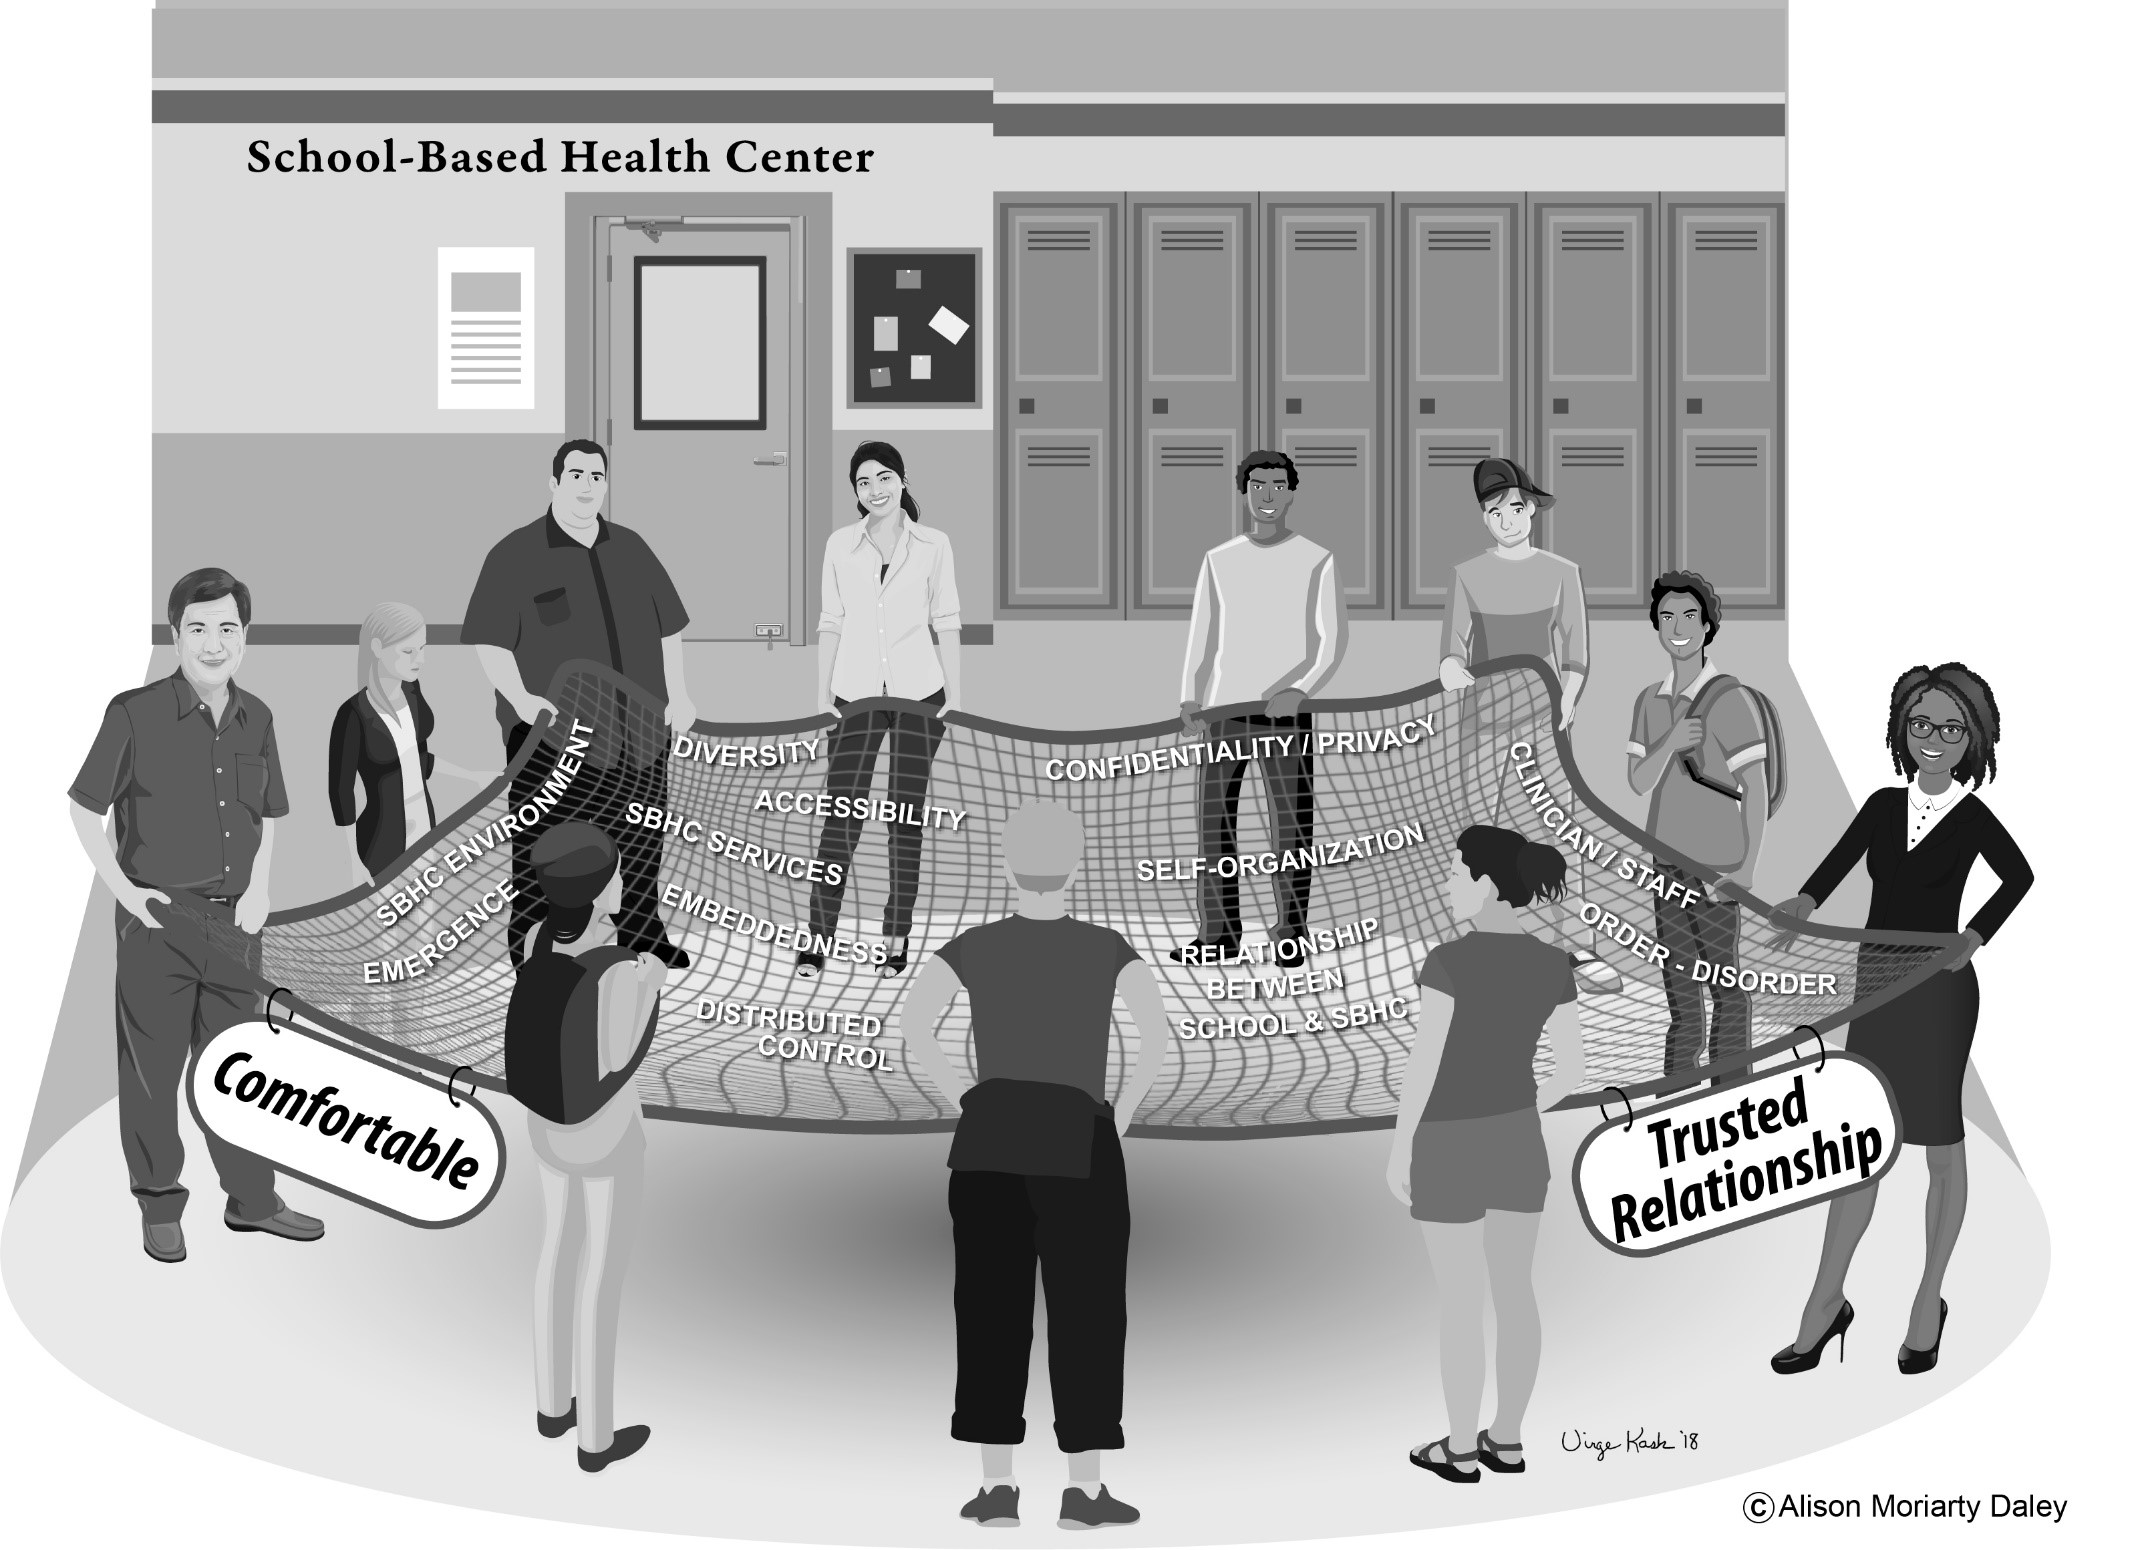 Cartoon diverse School officials in front of sign that says "School-based Health center" holding a net with words lying on it: SBHC environment, Emergence, Diversity, Accessibility, SBHC Services, Embeddedness, Distributed control, confidentiality/privacy, self-organization, relationship between school and SBHC, clinician staff, order, disorder; Hanging from net are words Comfortable, and Trusted Relationship;